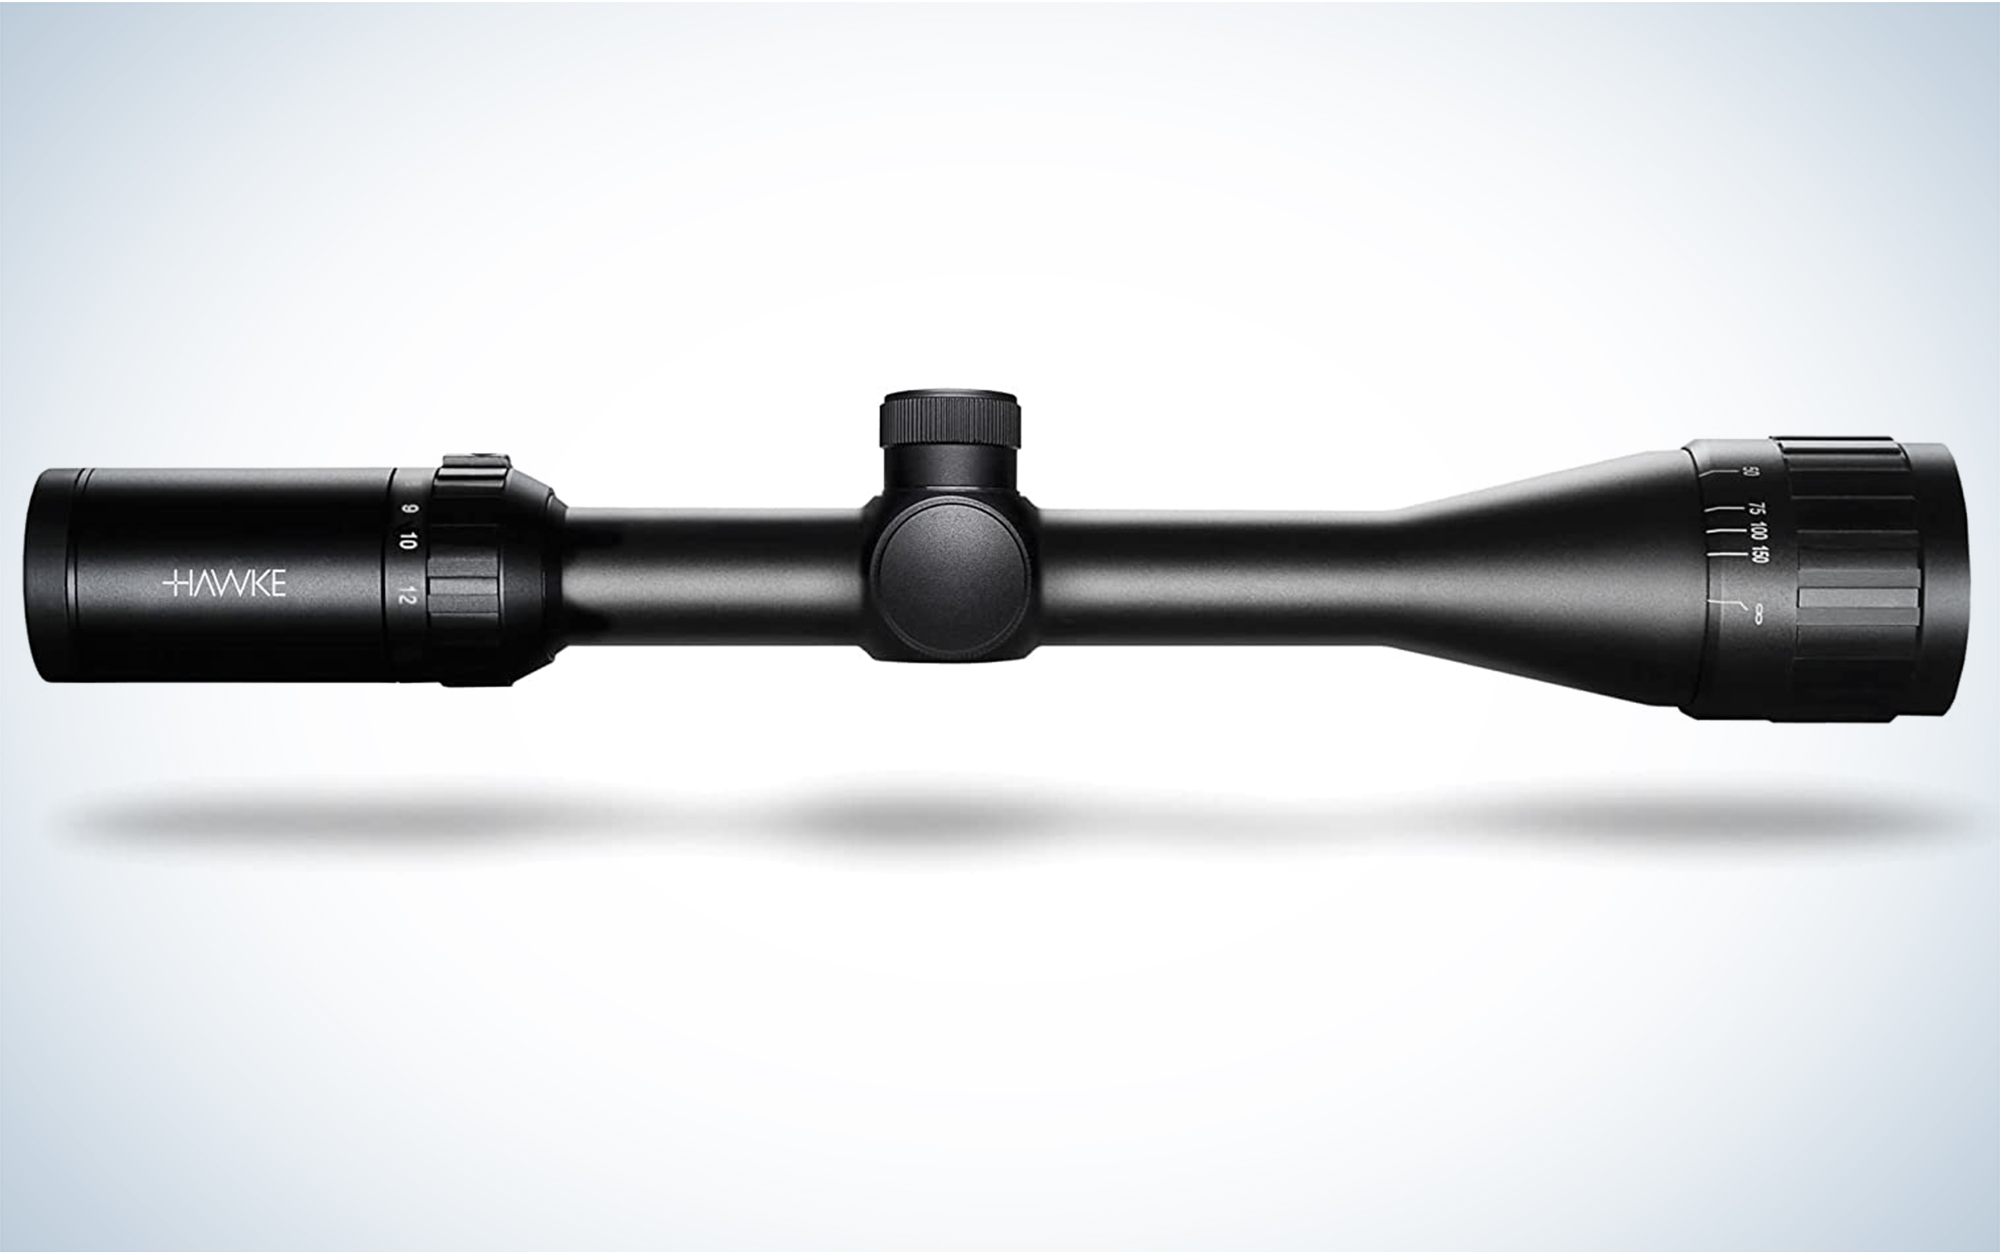 The Hawke Vantage IR 4-12x40 AO is the best .22 Magnum scope.